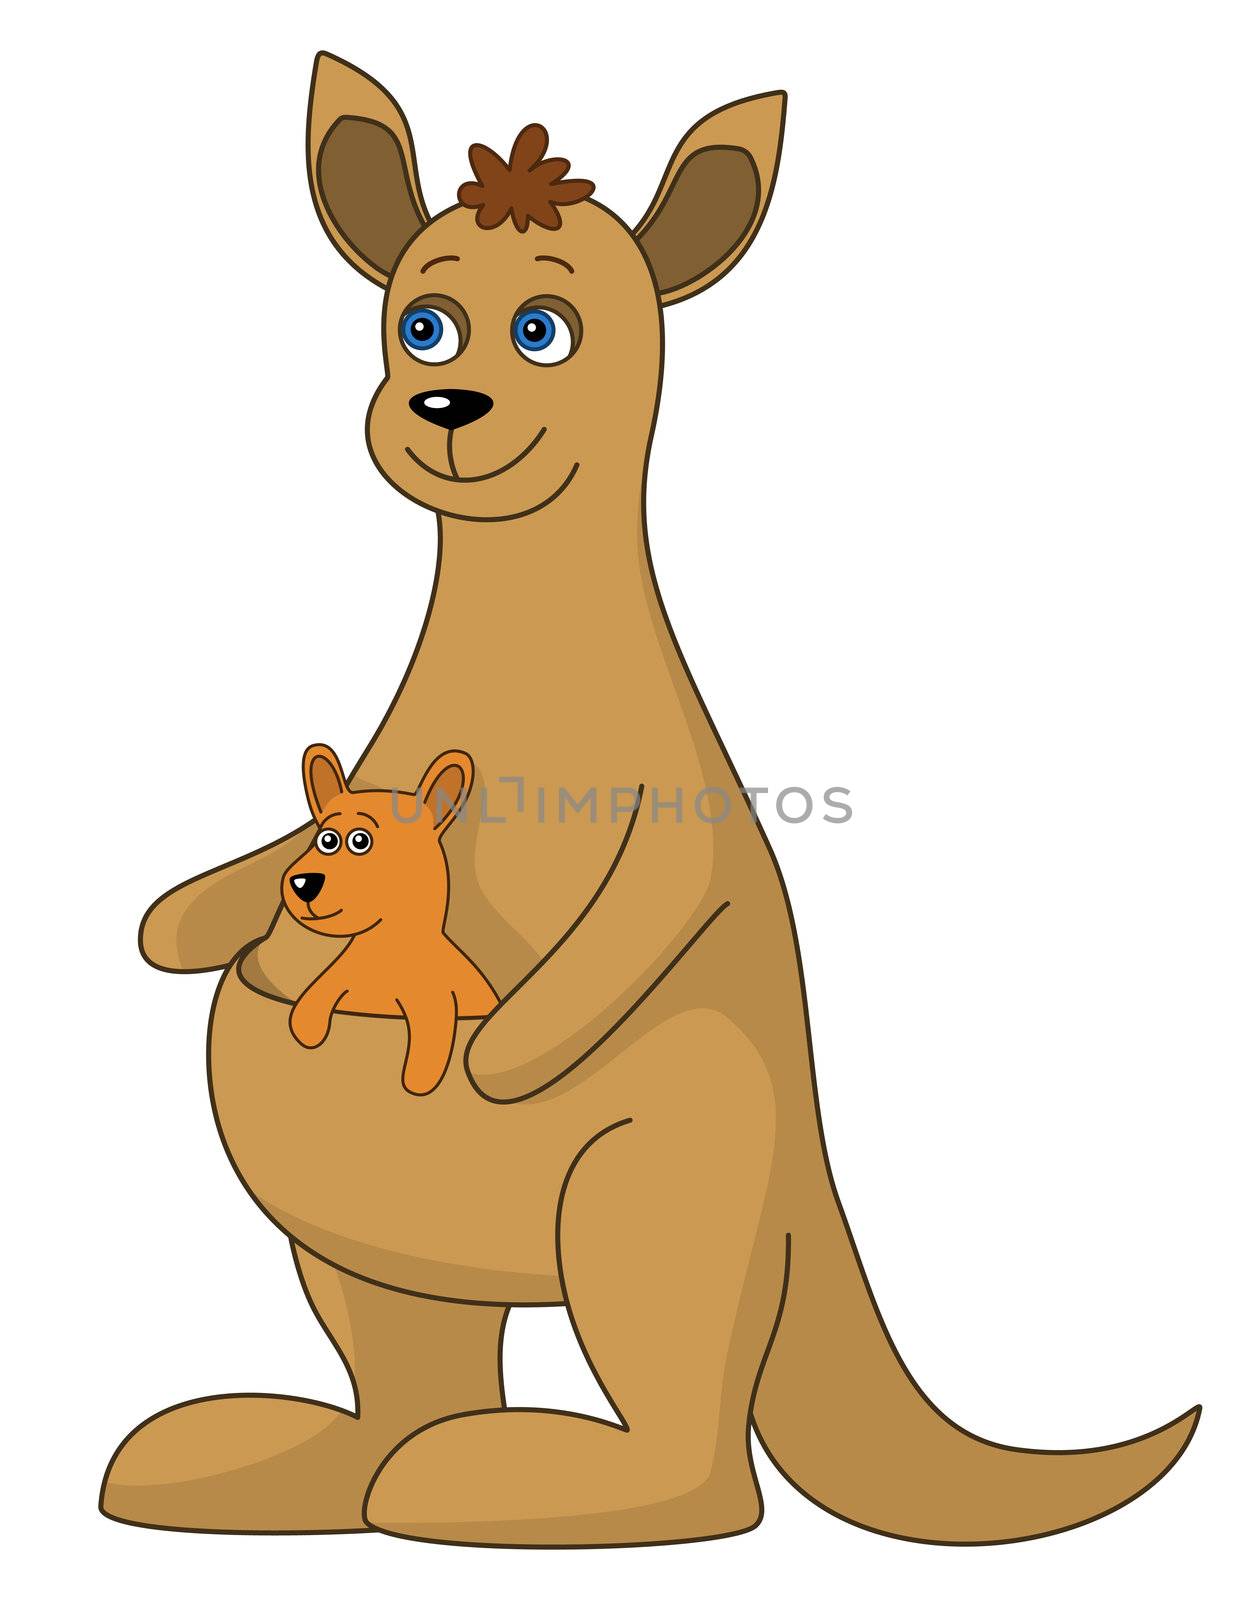 Animals: mother - kangaroo with a little cub in pouch